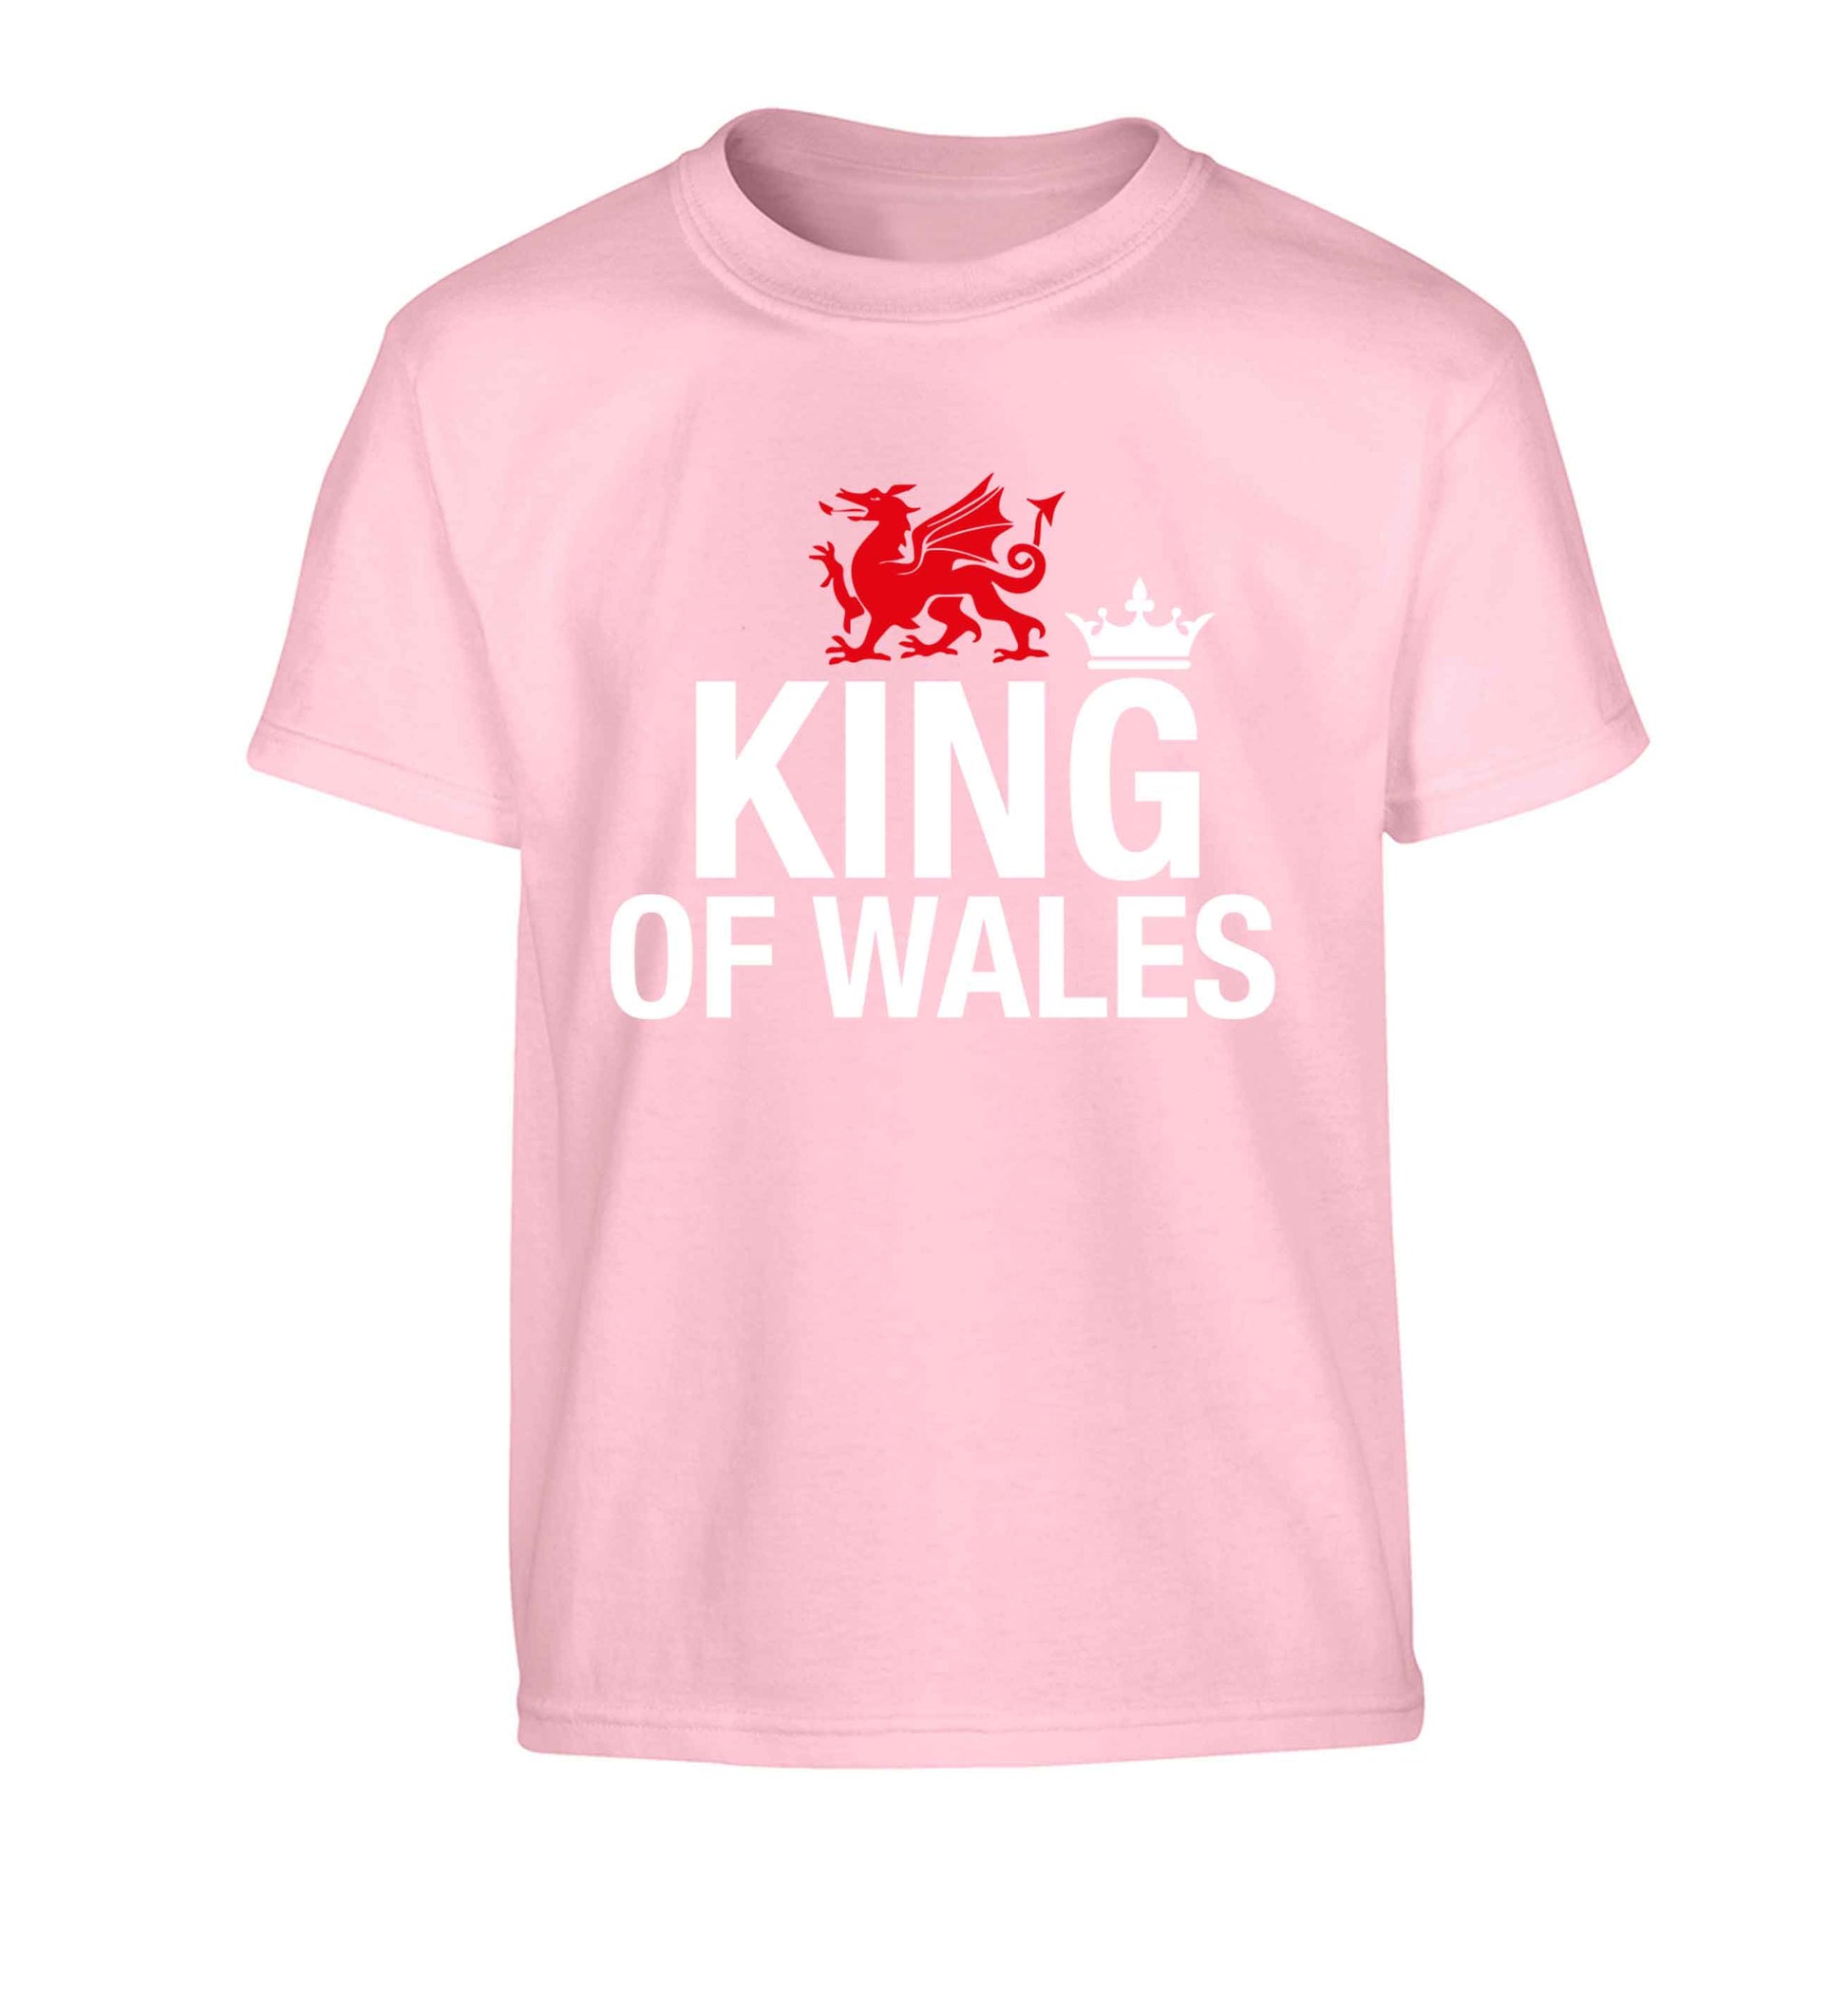 King of Wales Children's light pink Tshirt 12-13 Years